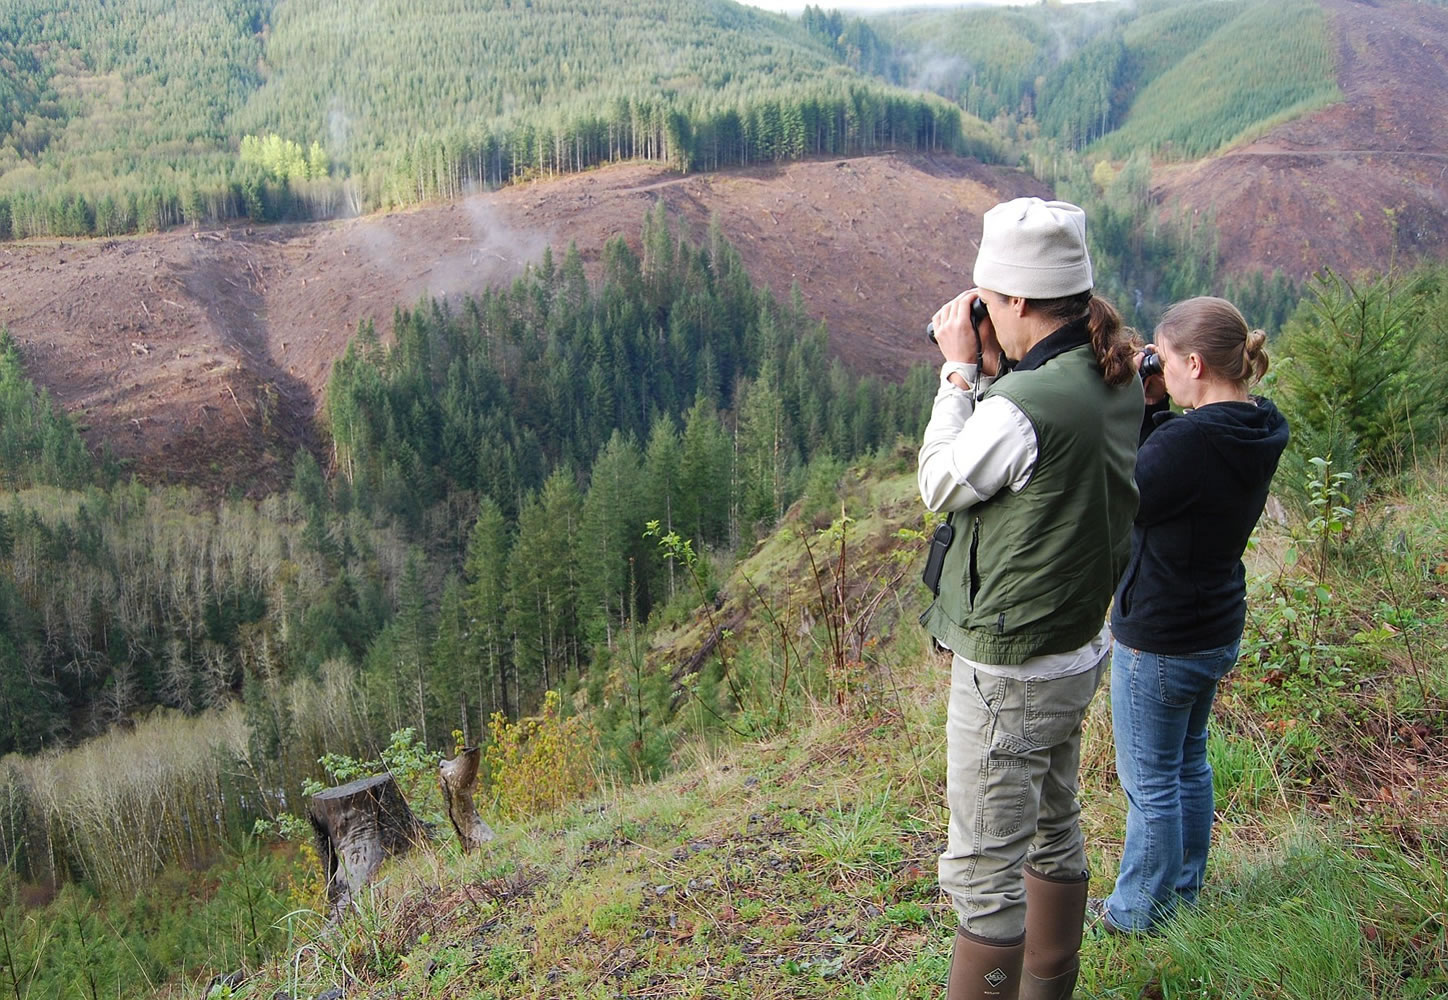 State wildlife biologists Eric Holman and Brooke George watch a herd of elk to see if the animals are limping.